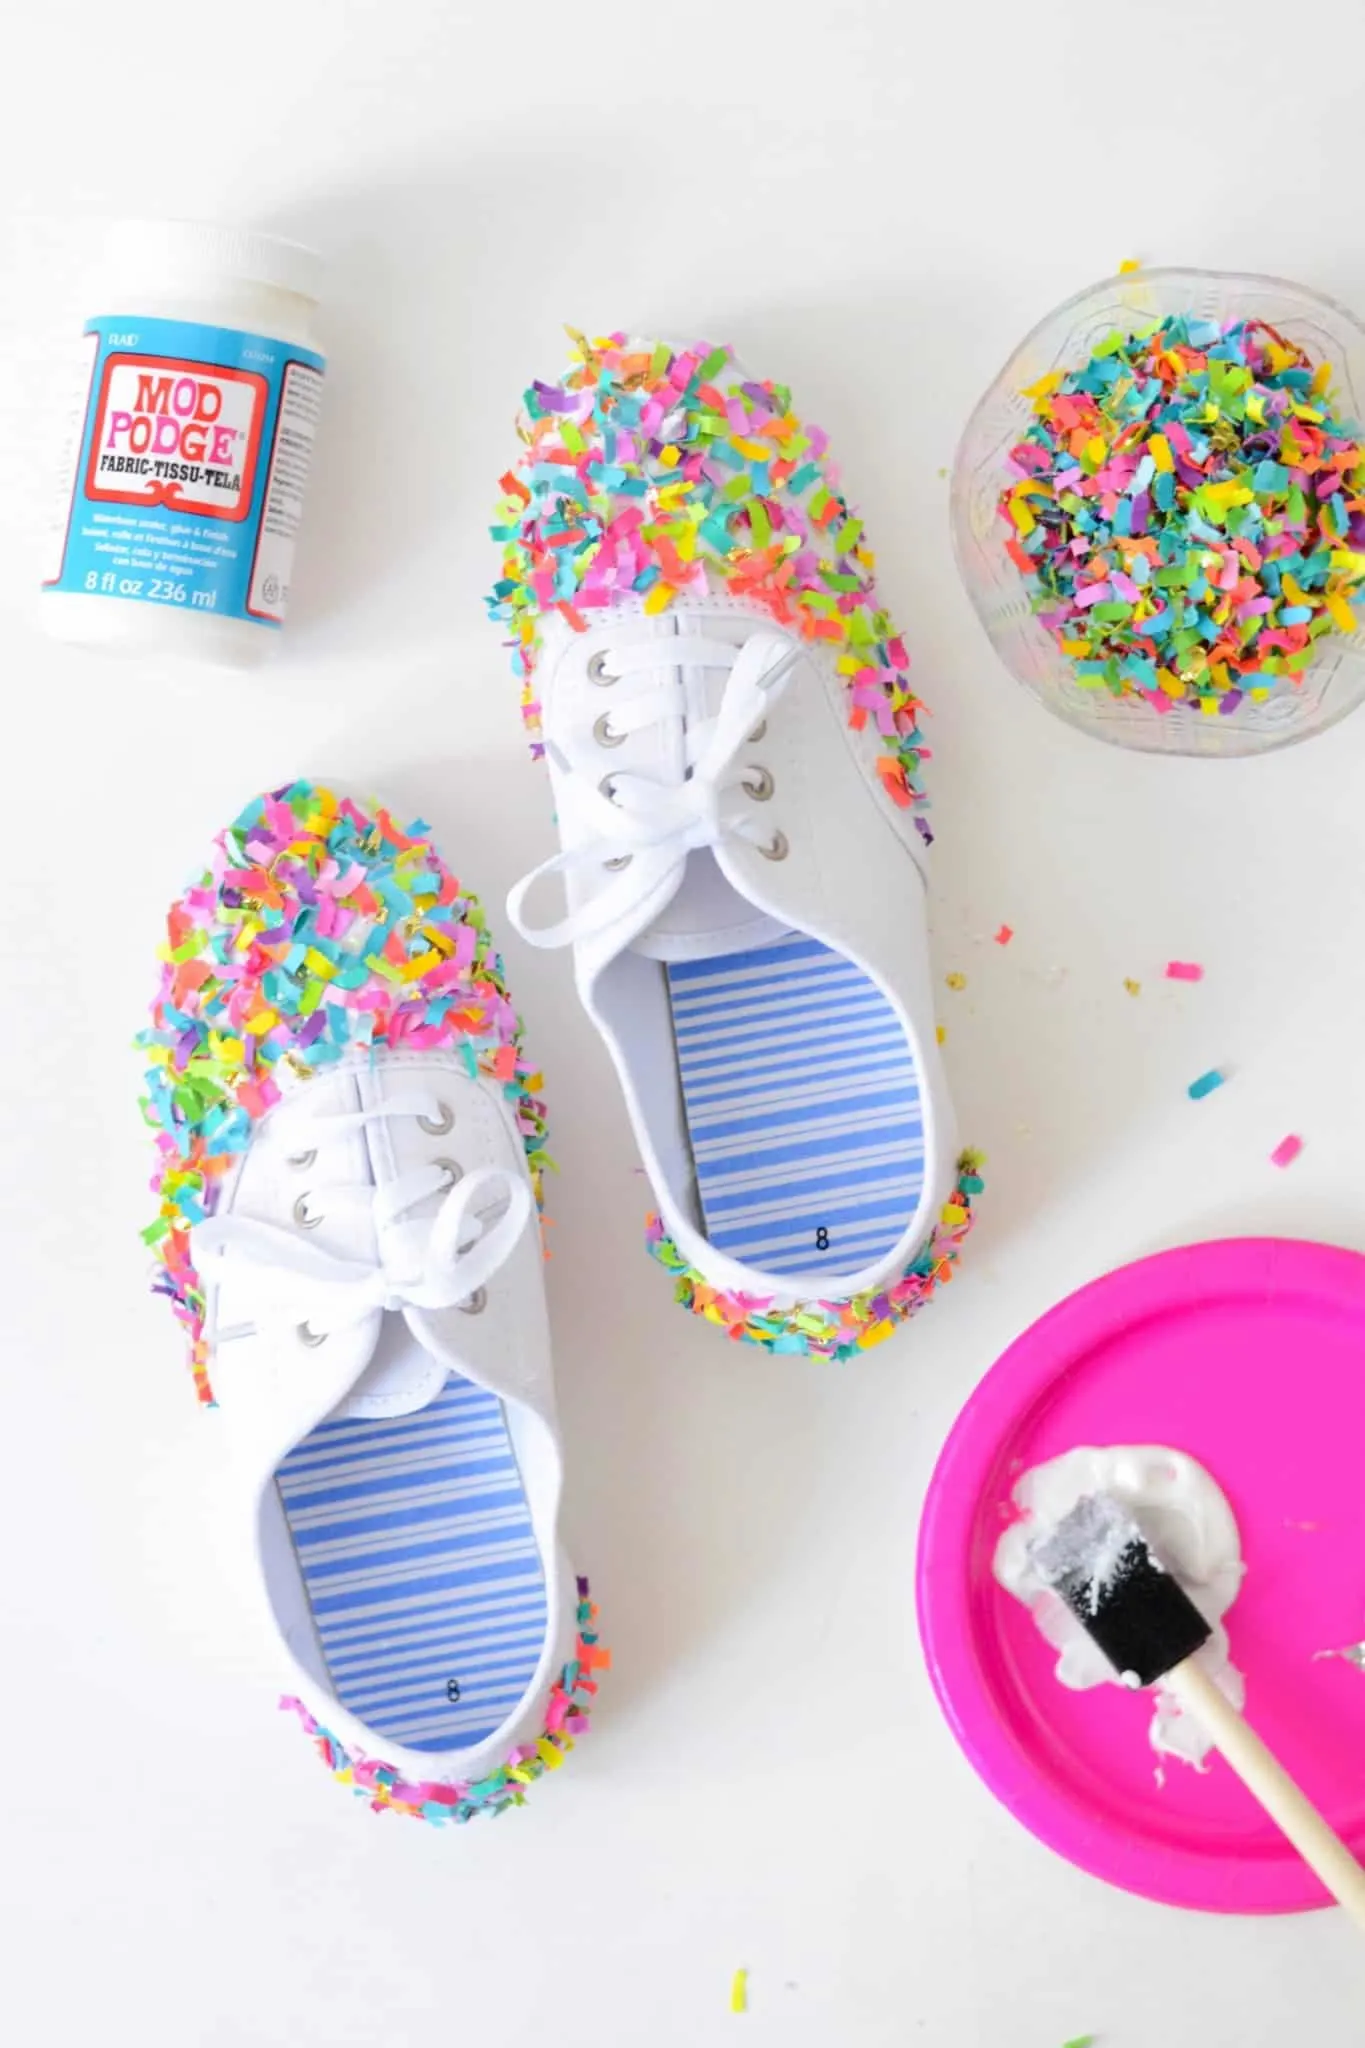 Applying confetti to shoes with Mod Podge